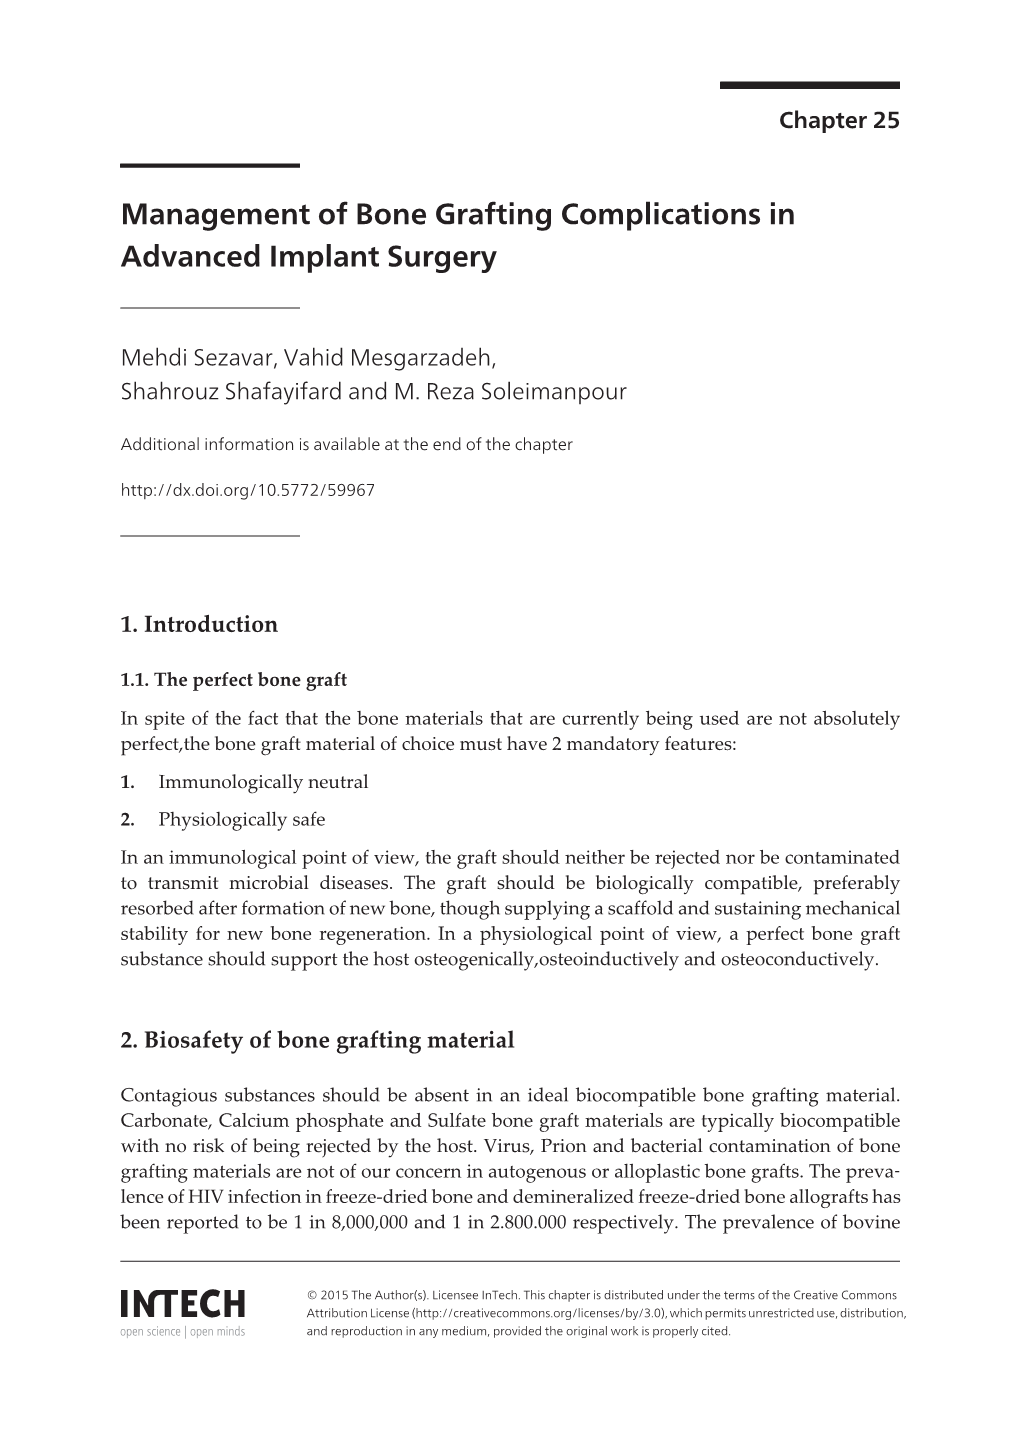 Management of Bone Grafting Complications in Advanced Implant Surgery